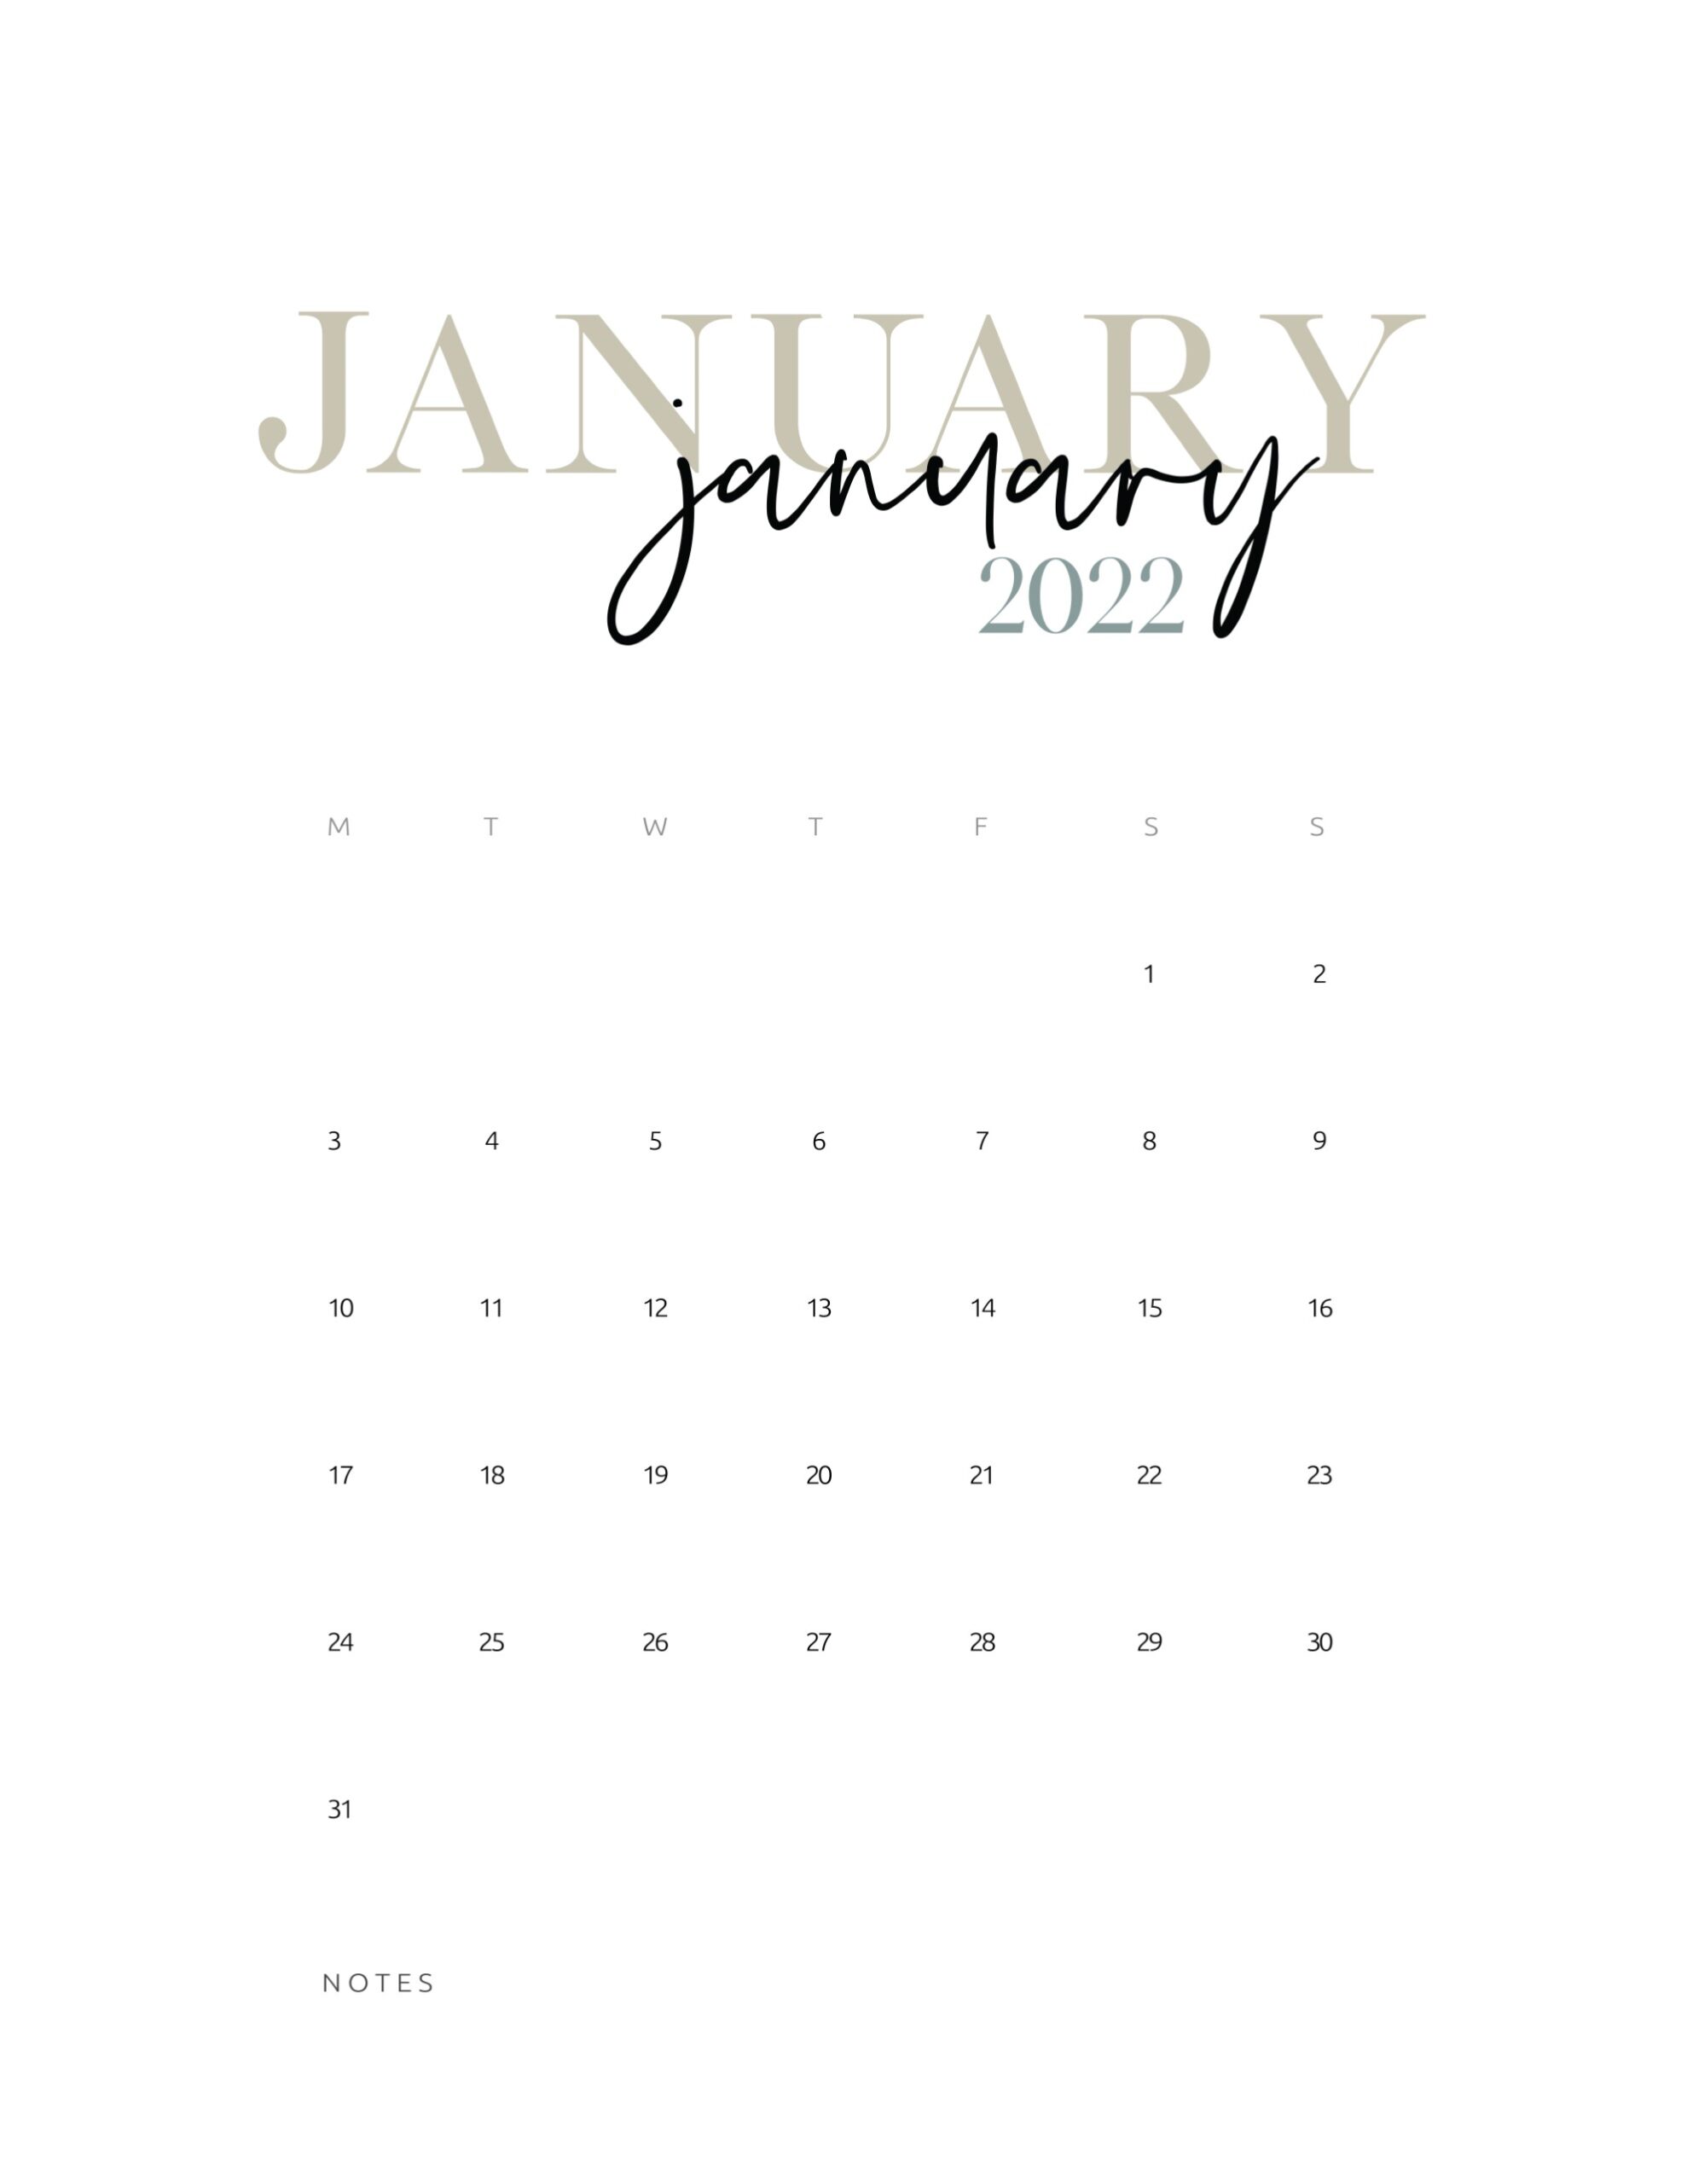 Monthly Calendar Printable 2022 Free 2022 Monthly Calendar Printable - World Of Printables